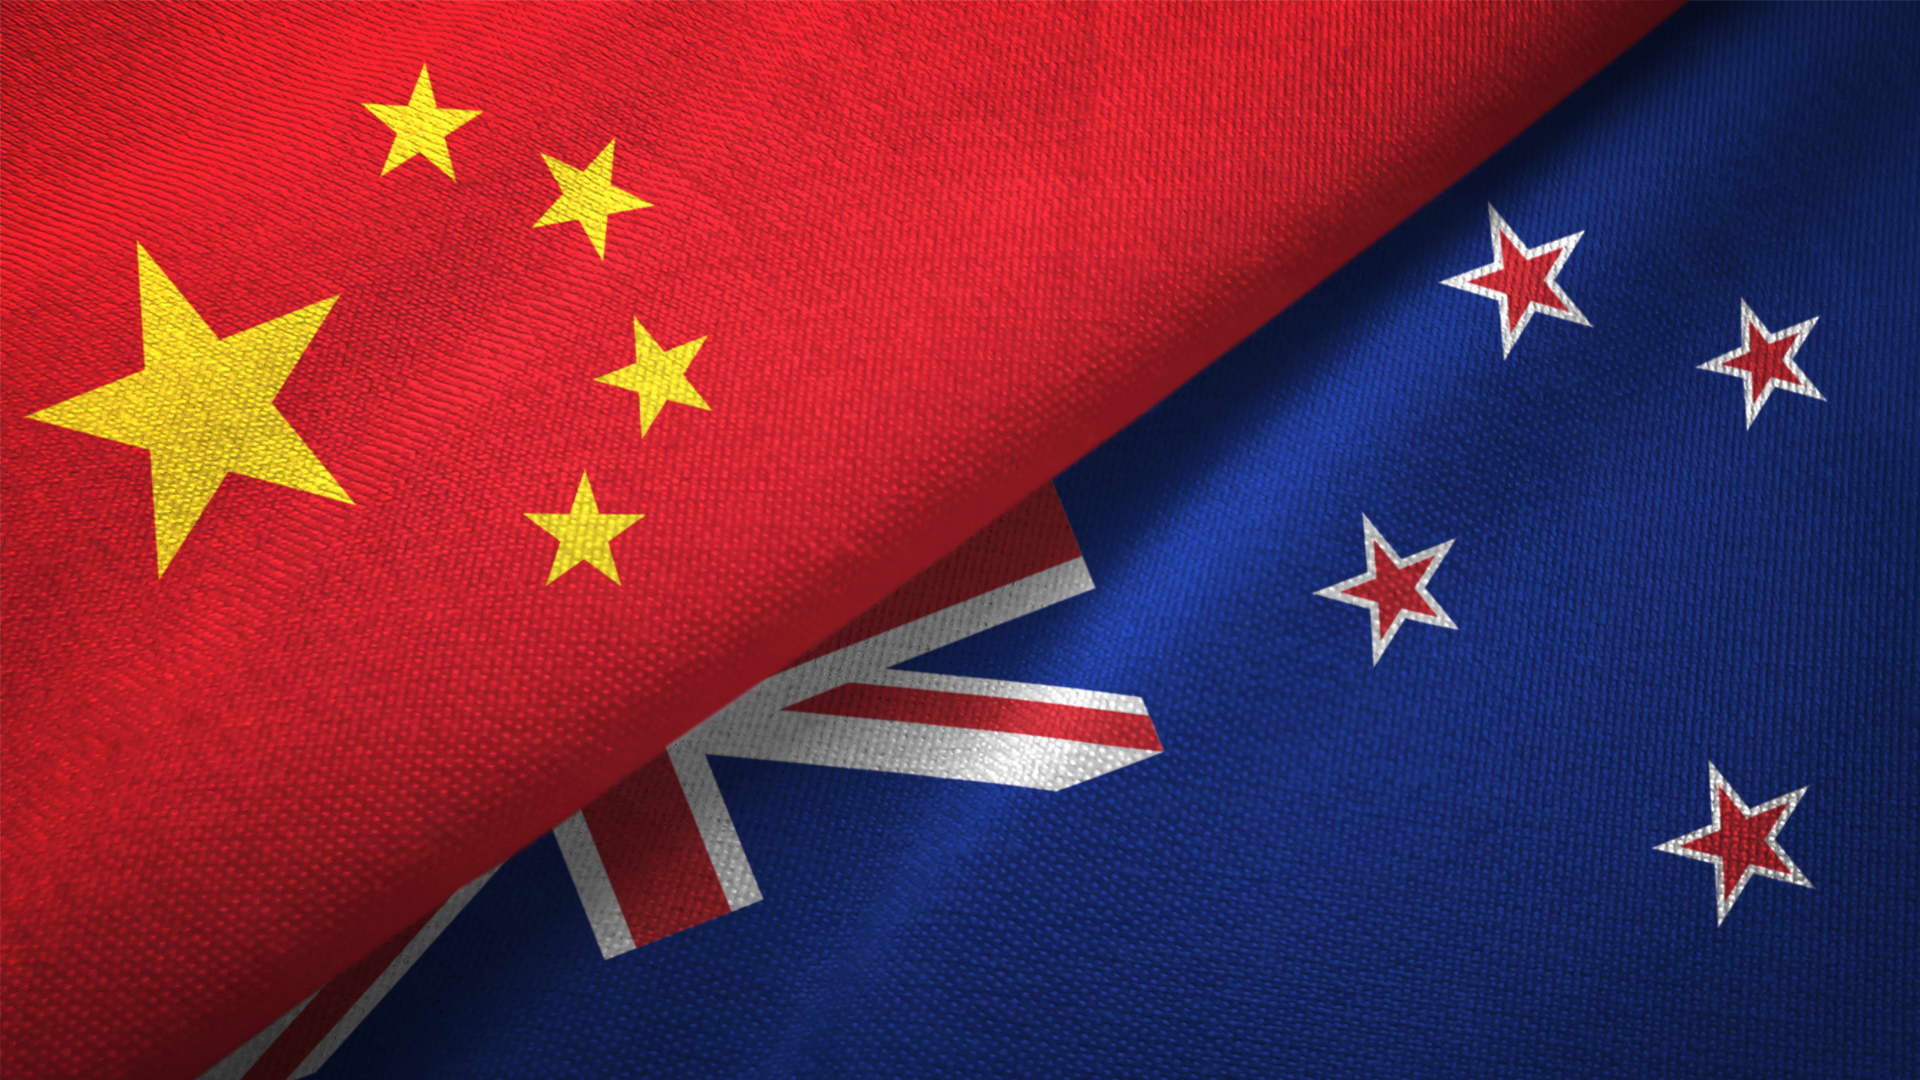 New Zealand and China flag together 